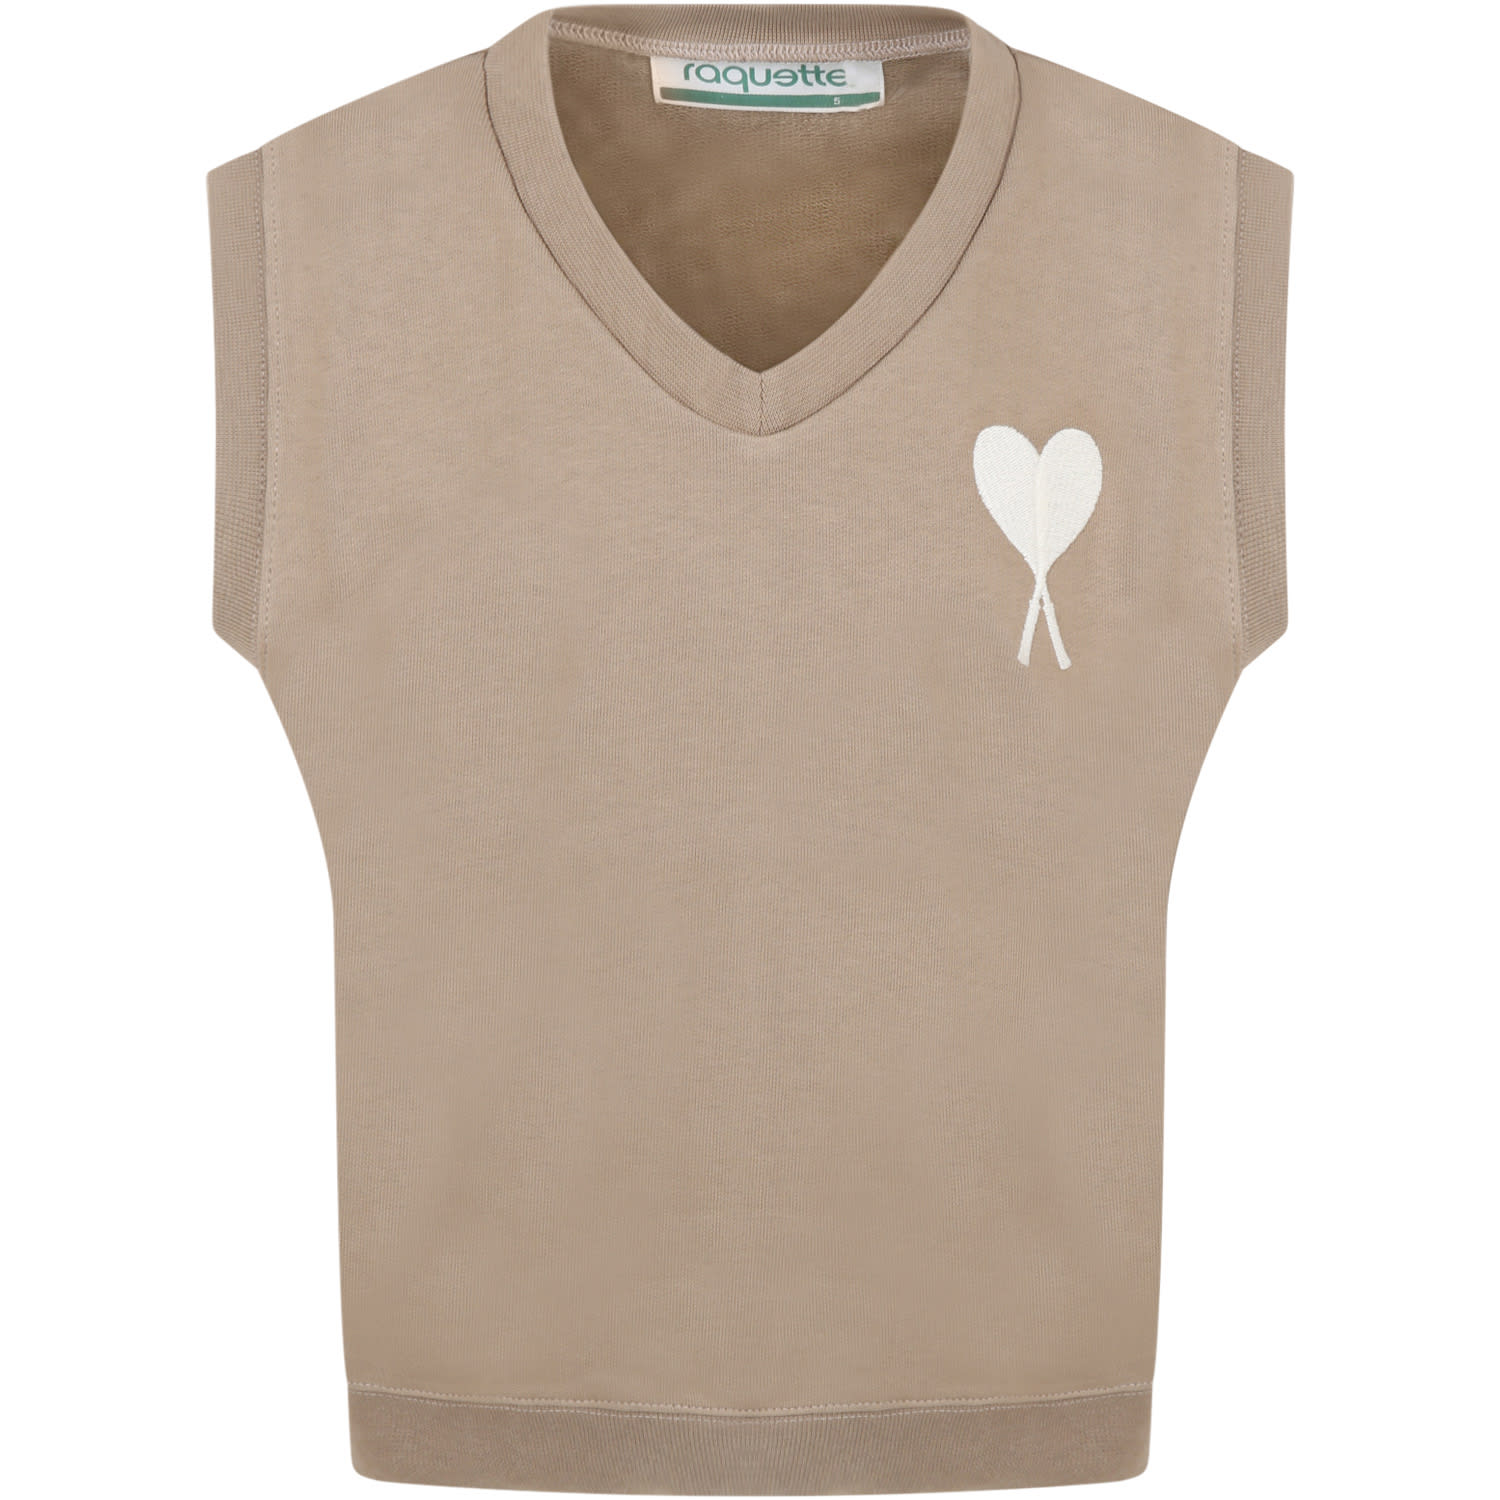 Raquette Beige Vest For Kids With Rackets